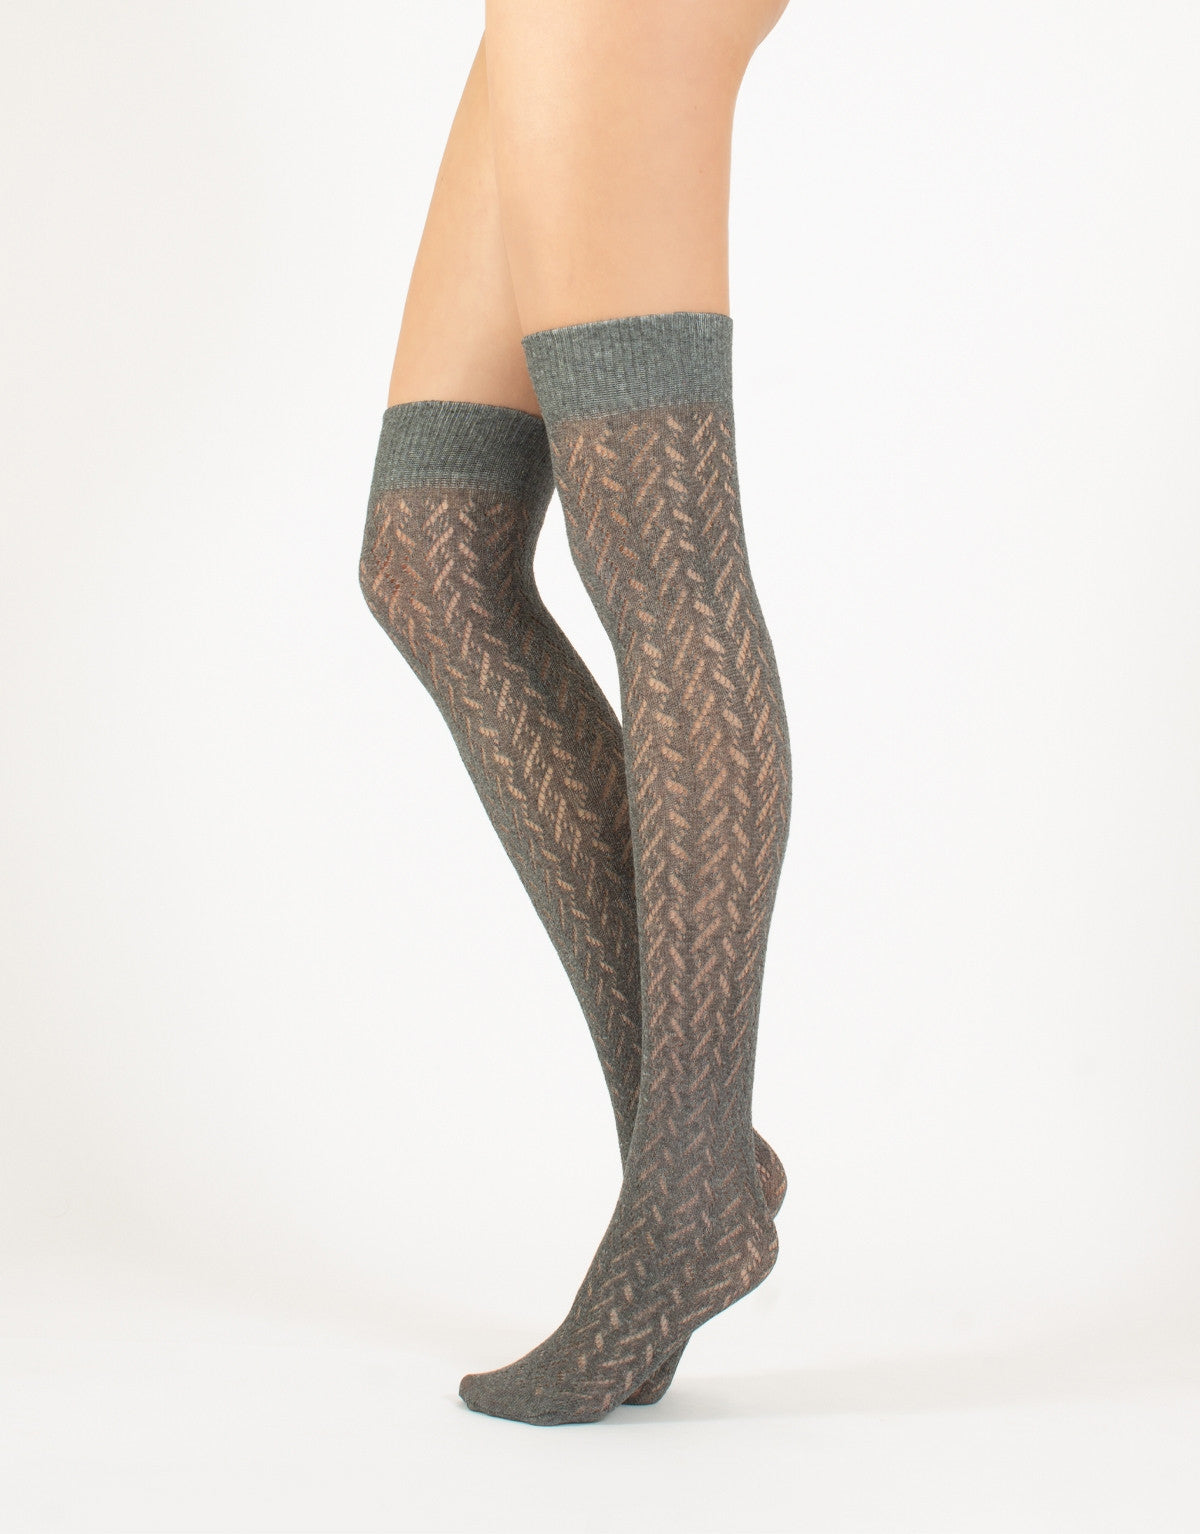 Calzitaly Chevron Over-Knee Socks - Grey knitted over the knee socks with an openwork cable style pattern, plain elasticated cuff and plain toe.